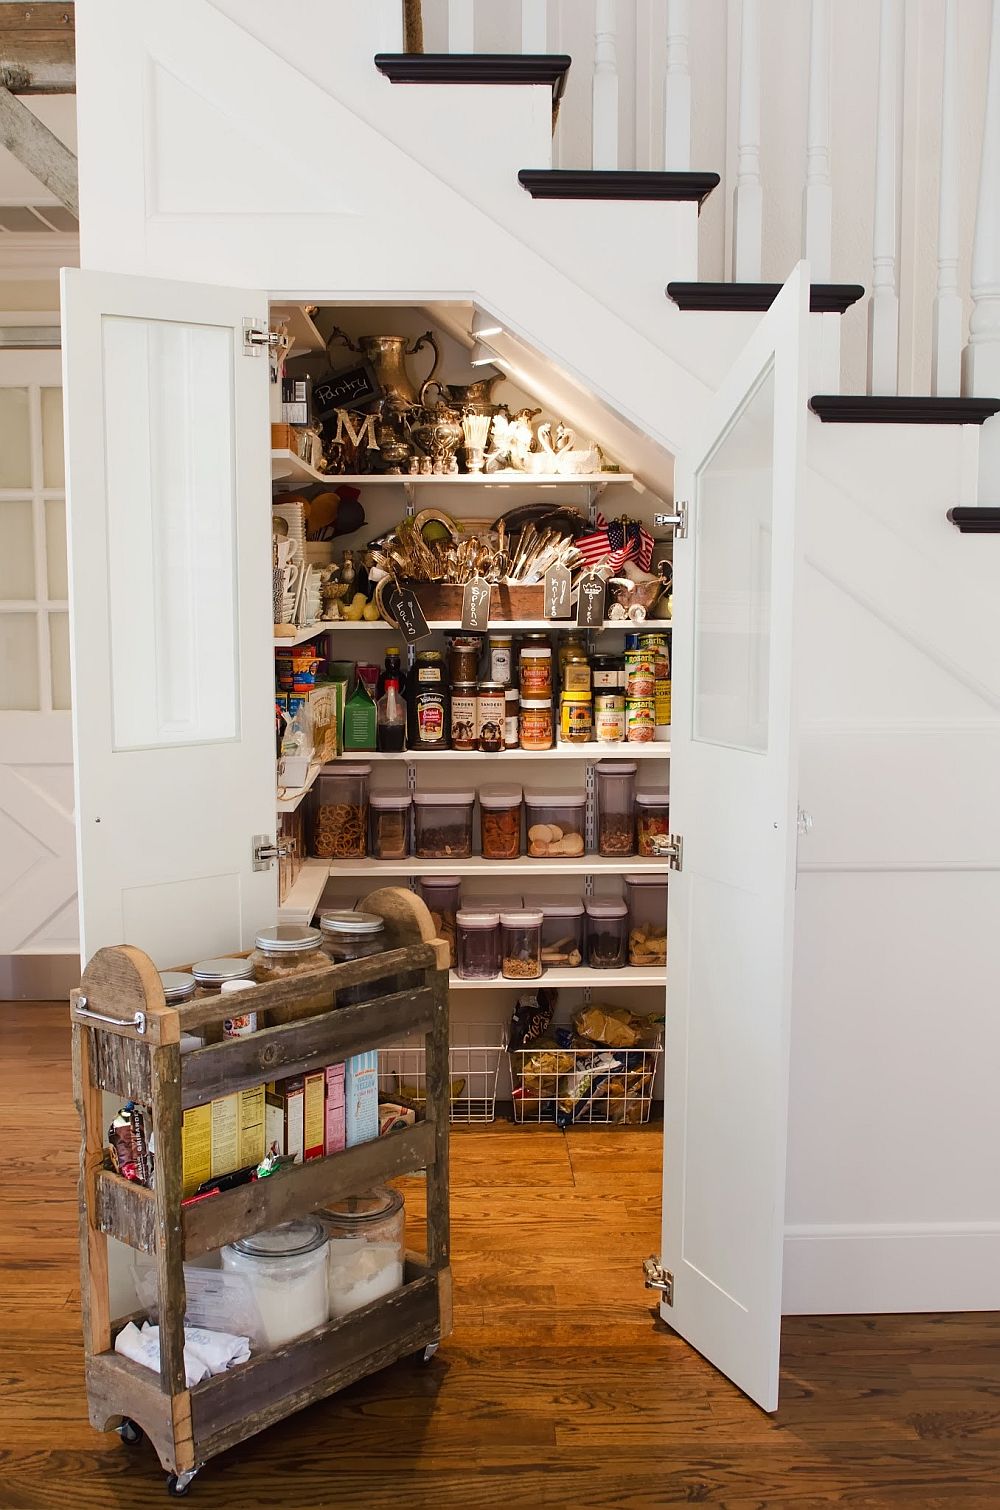 25 Smart Small Pantry Ideas To Maximize Your Kitchen Storage Space,King Size Ashley Furniture Bedroom Sets Discontinued